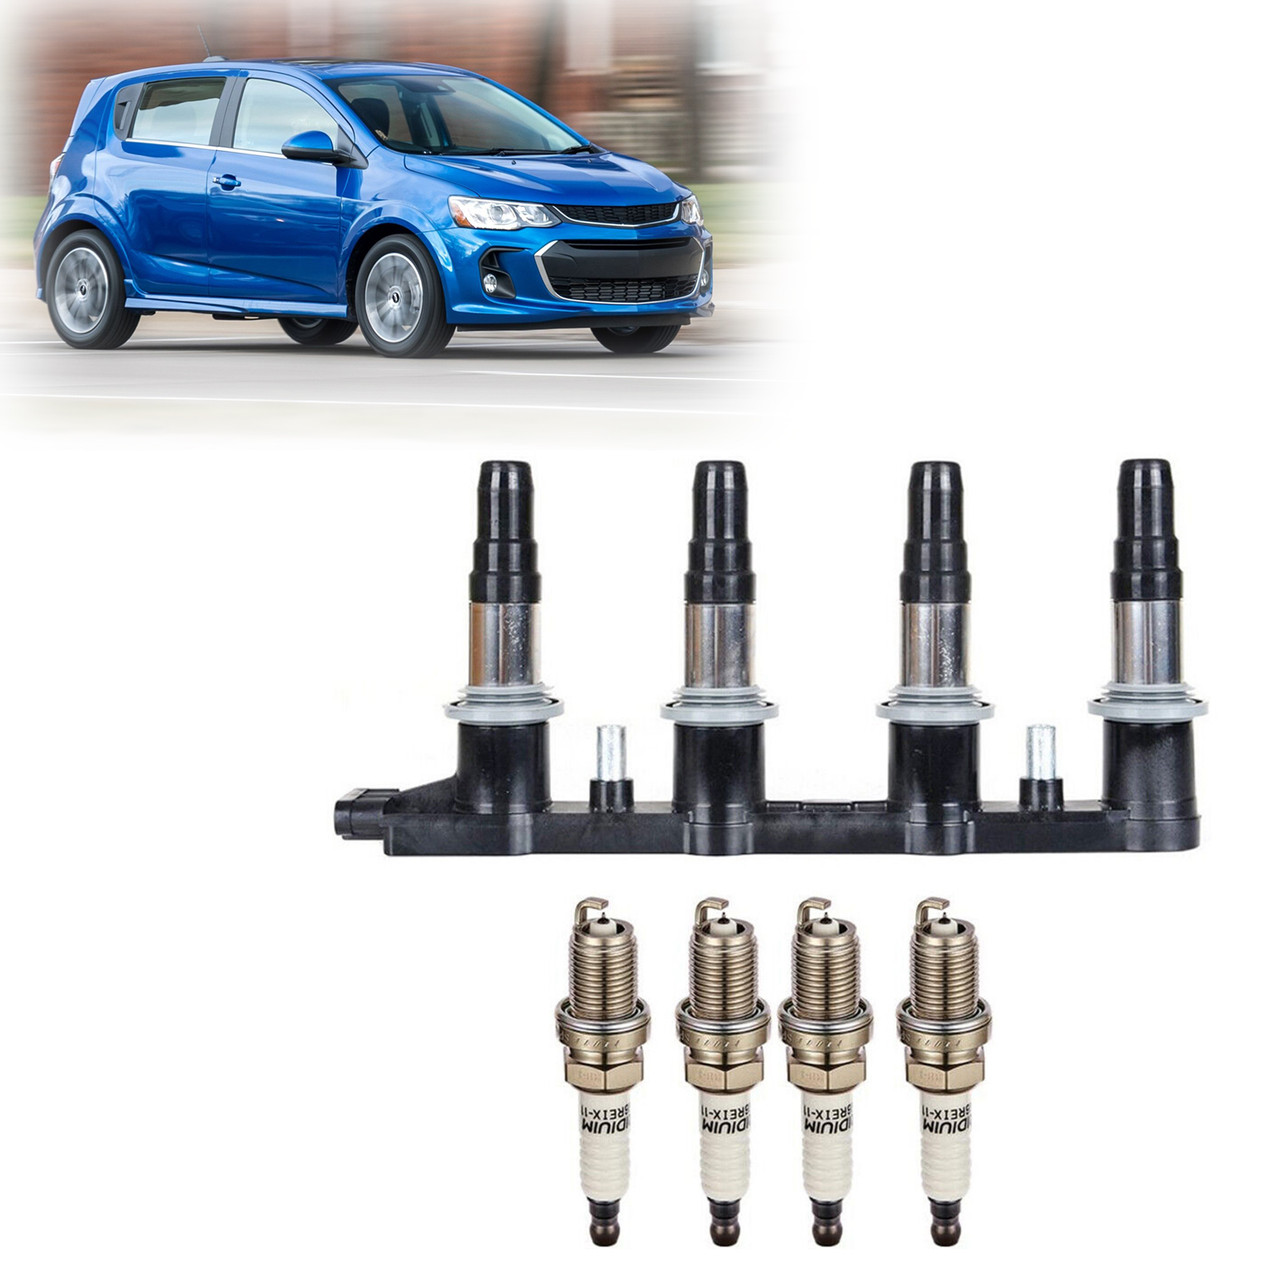 1x Ignition Coils +4x Spark Plugs 55561655 For Chevrolet Sonic 1.8L 2012-2018